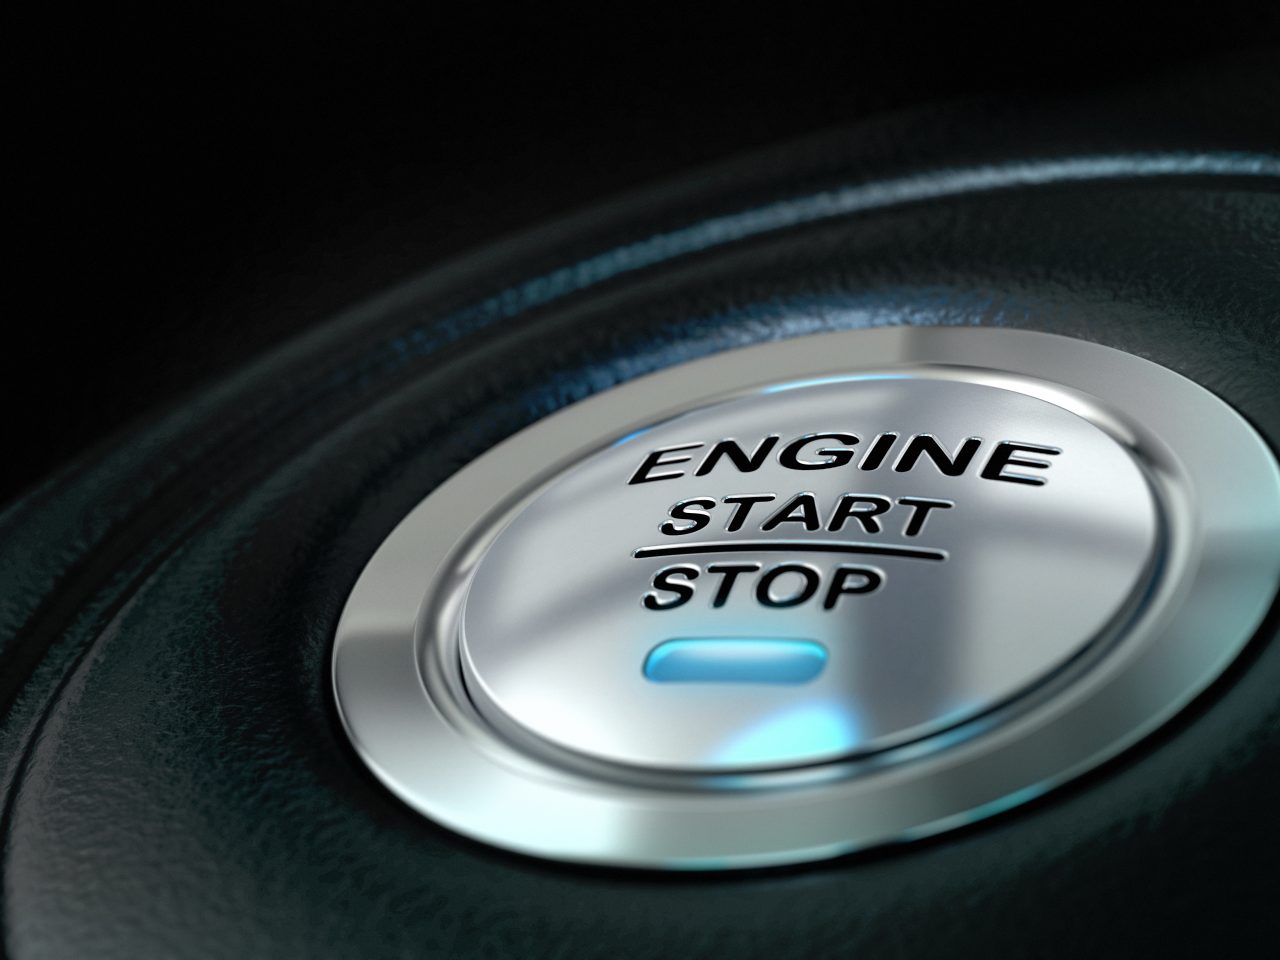 Car engine start and stop button with blue light anf black textured background, close up and details on the text